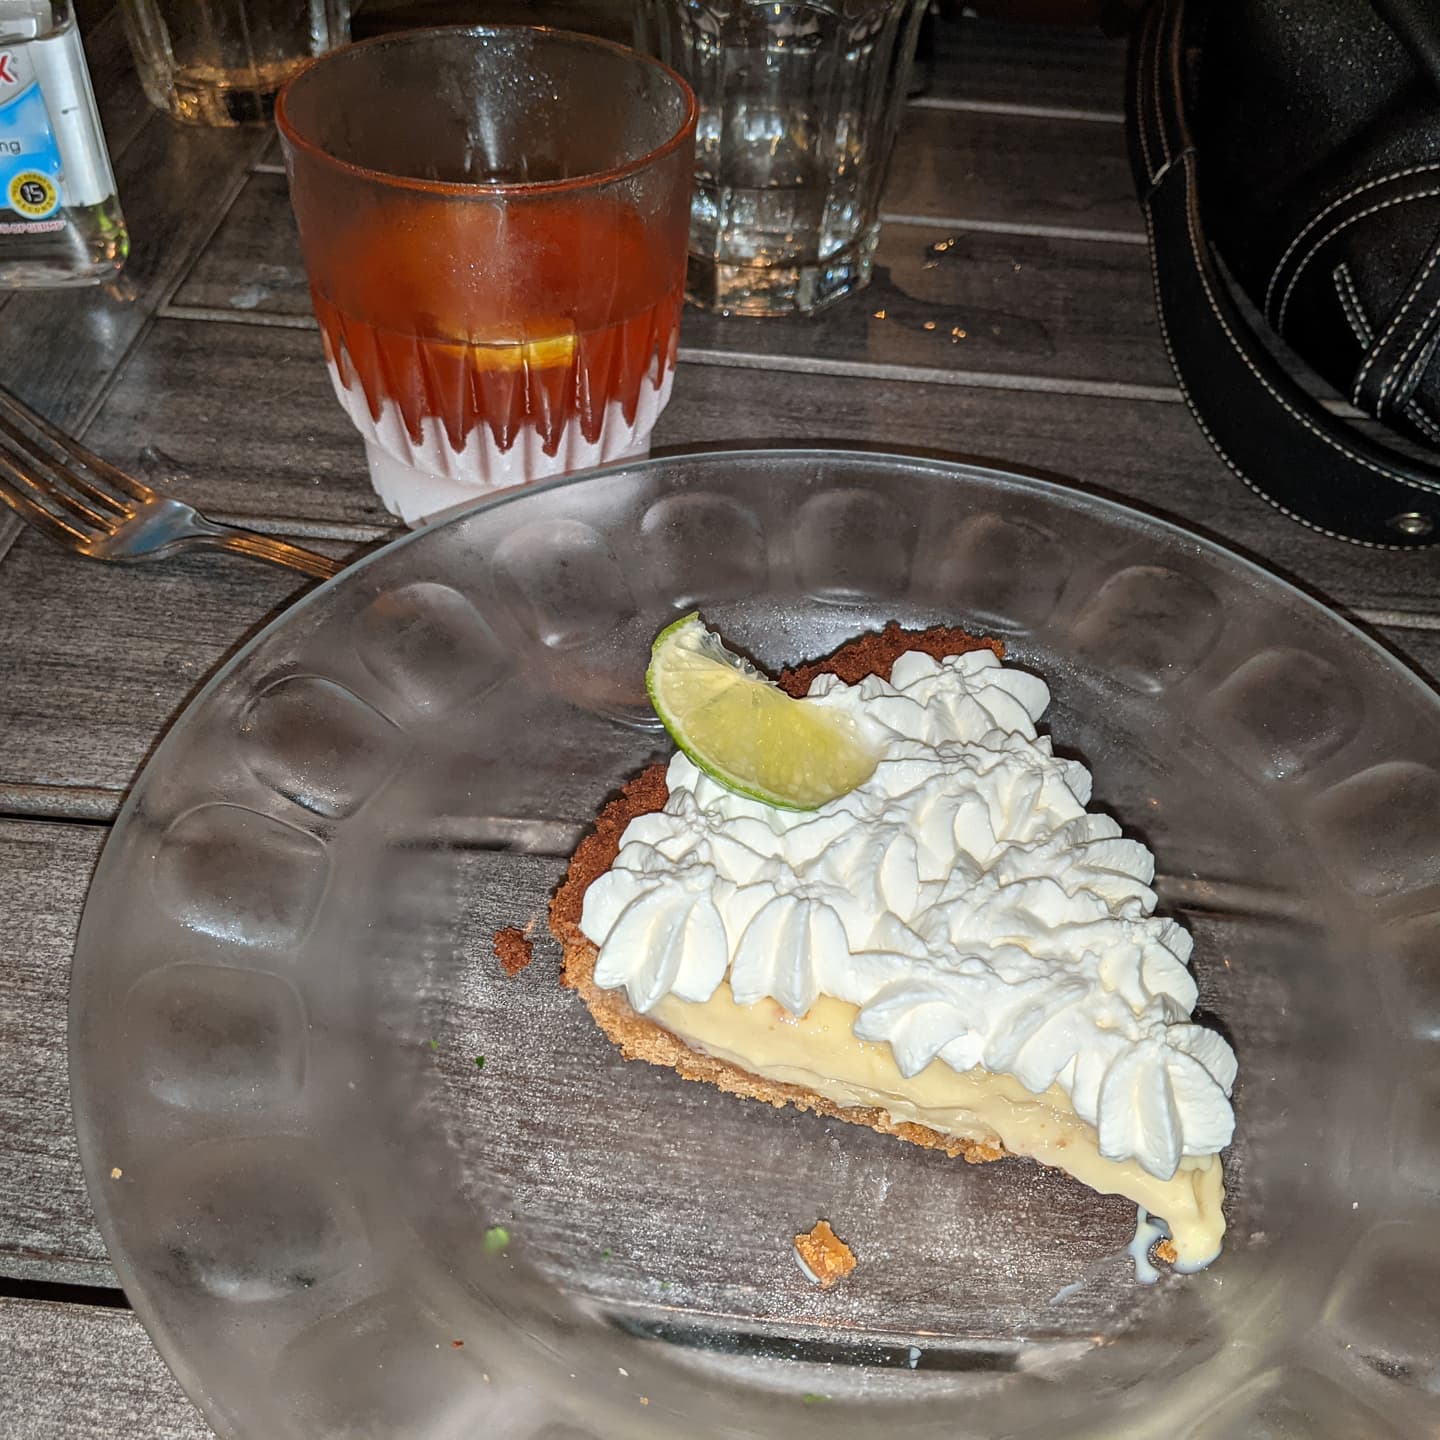 And I couldn't resist dessert of Key Lime Pie and another very frosty Sazerac #foodporn #frazersgoodeats #citylife #bentonpark